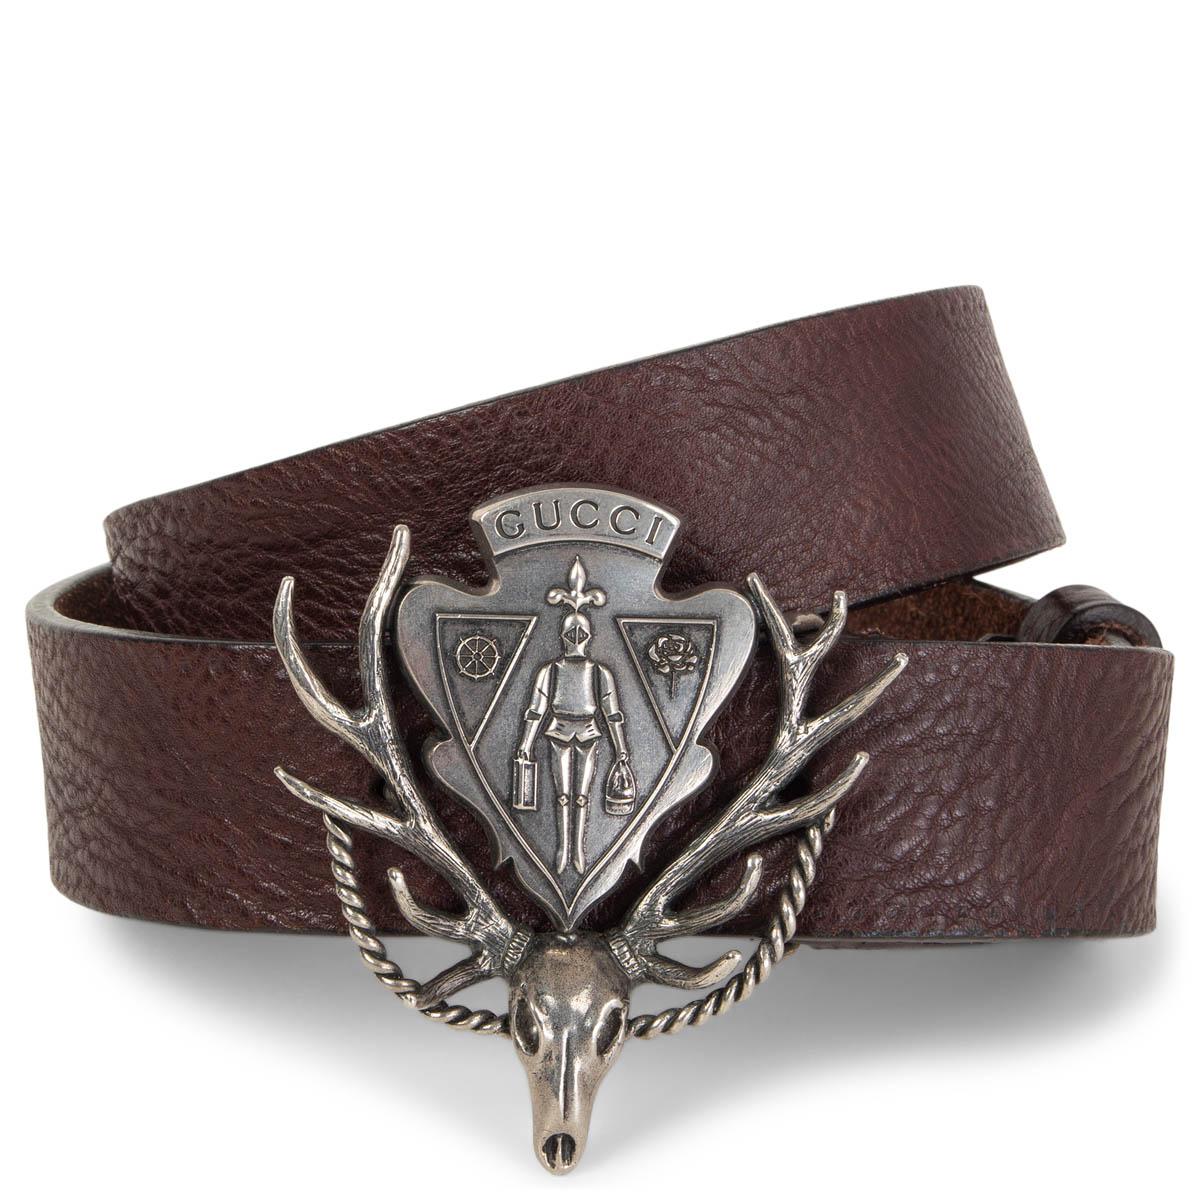 100% authentic Gucci Gucci antler crest belt in silver-tone metal and dark brown grained leather. Has been worn and is in excellent condition.

Measurements
Tag Size	85/34
Width	4cm (1.6in)
Fits	85cm (33.2in) to 90cm (35.1in)
Length	104cm